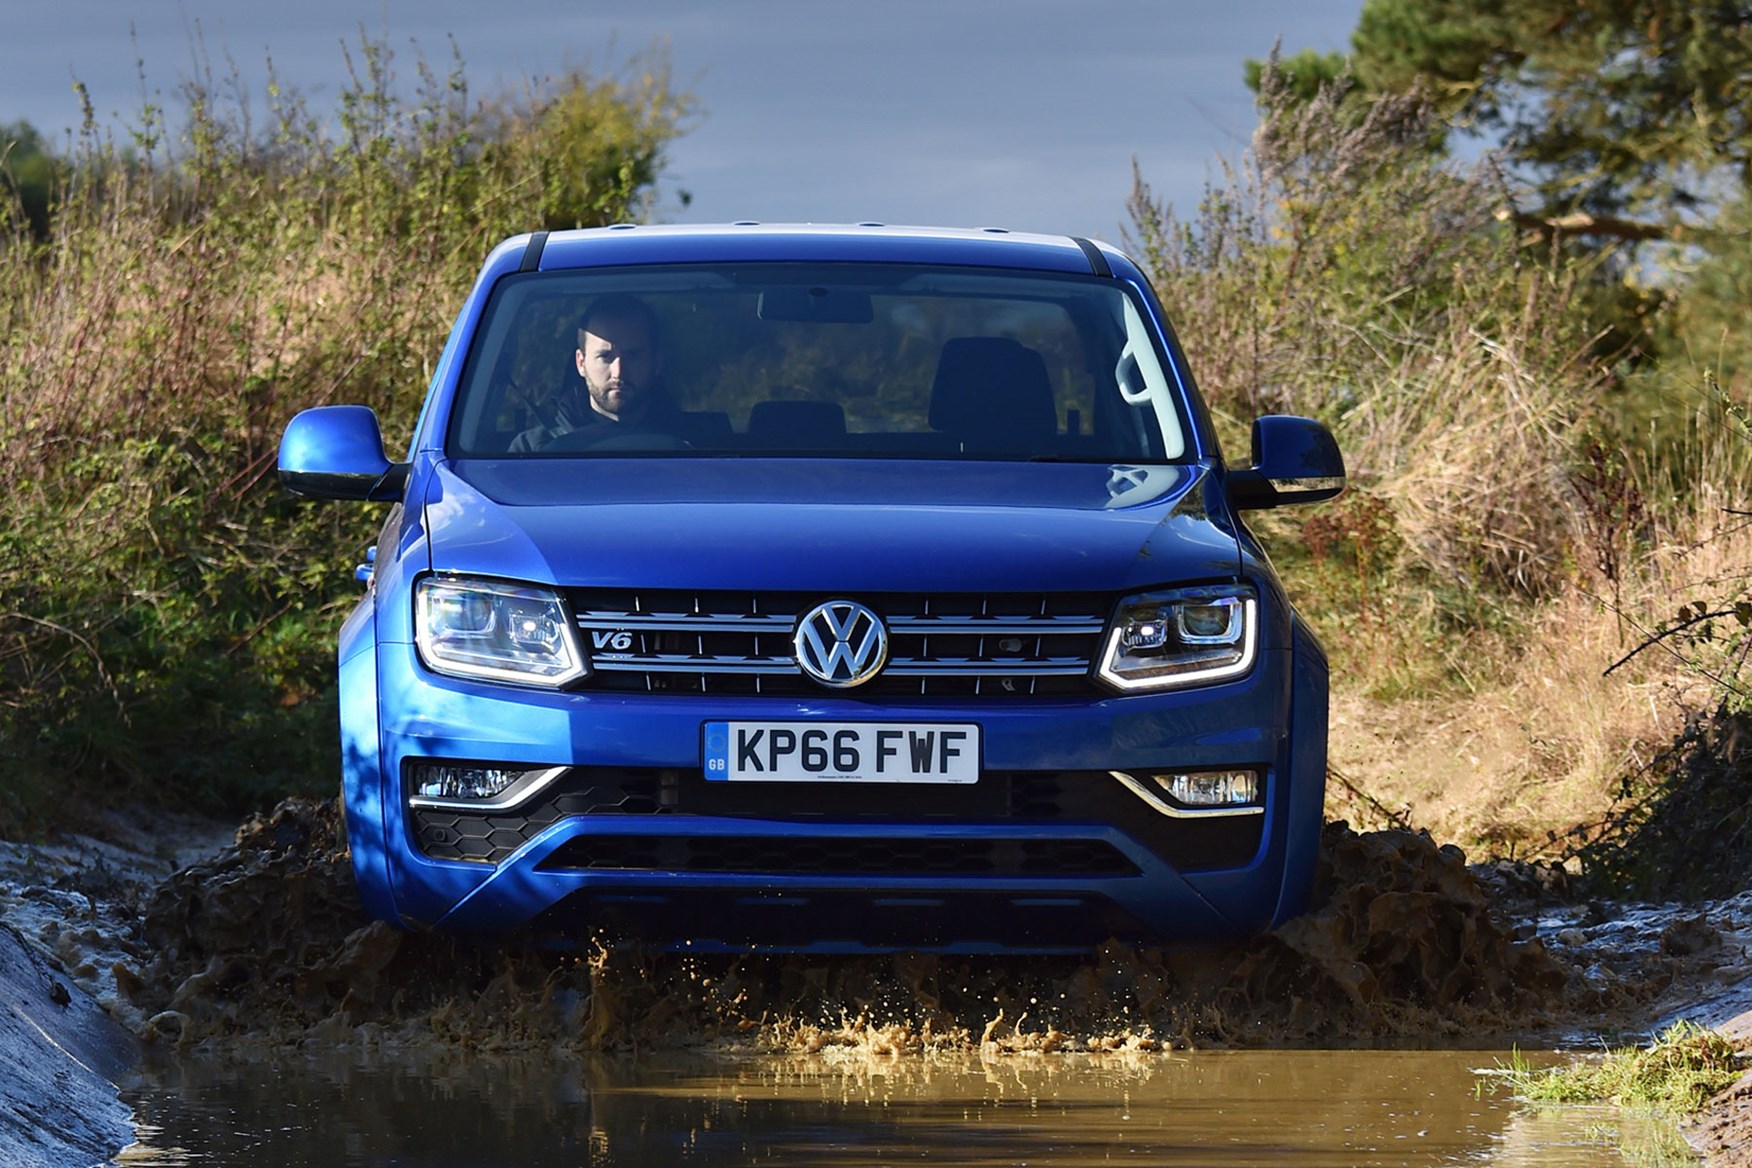 VW Amarok V6 Aventura 224hp review - front view, driving off road, blue